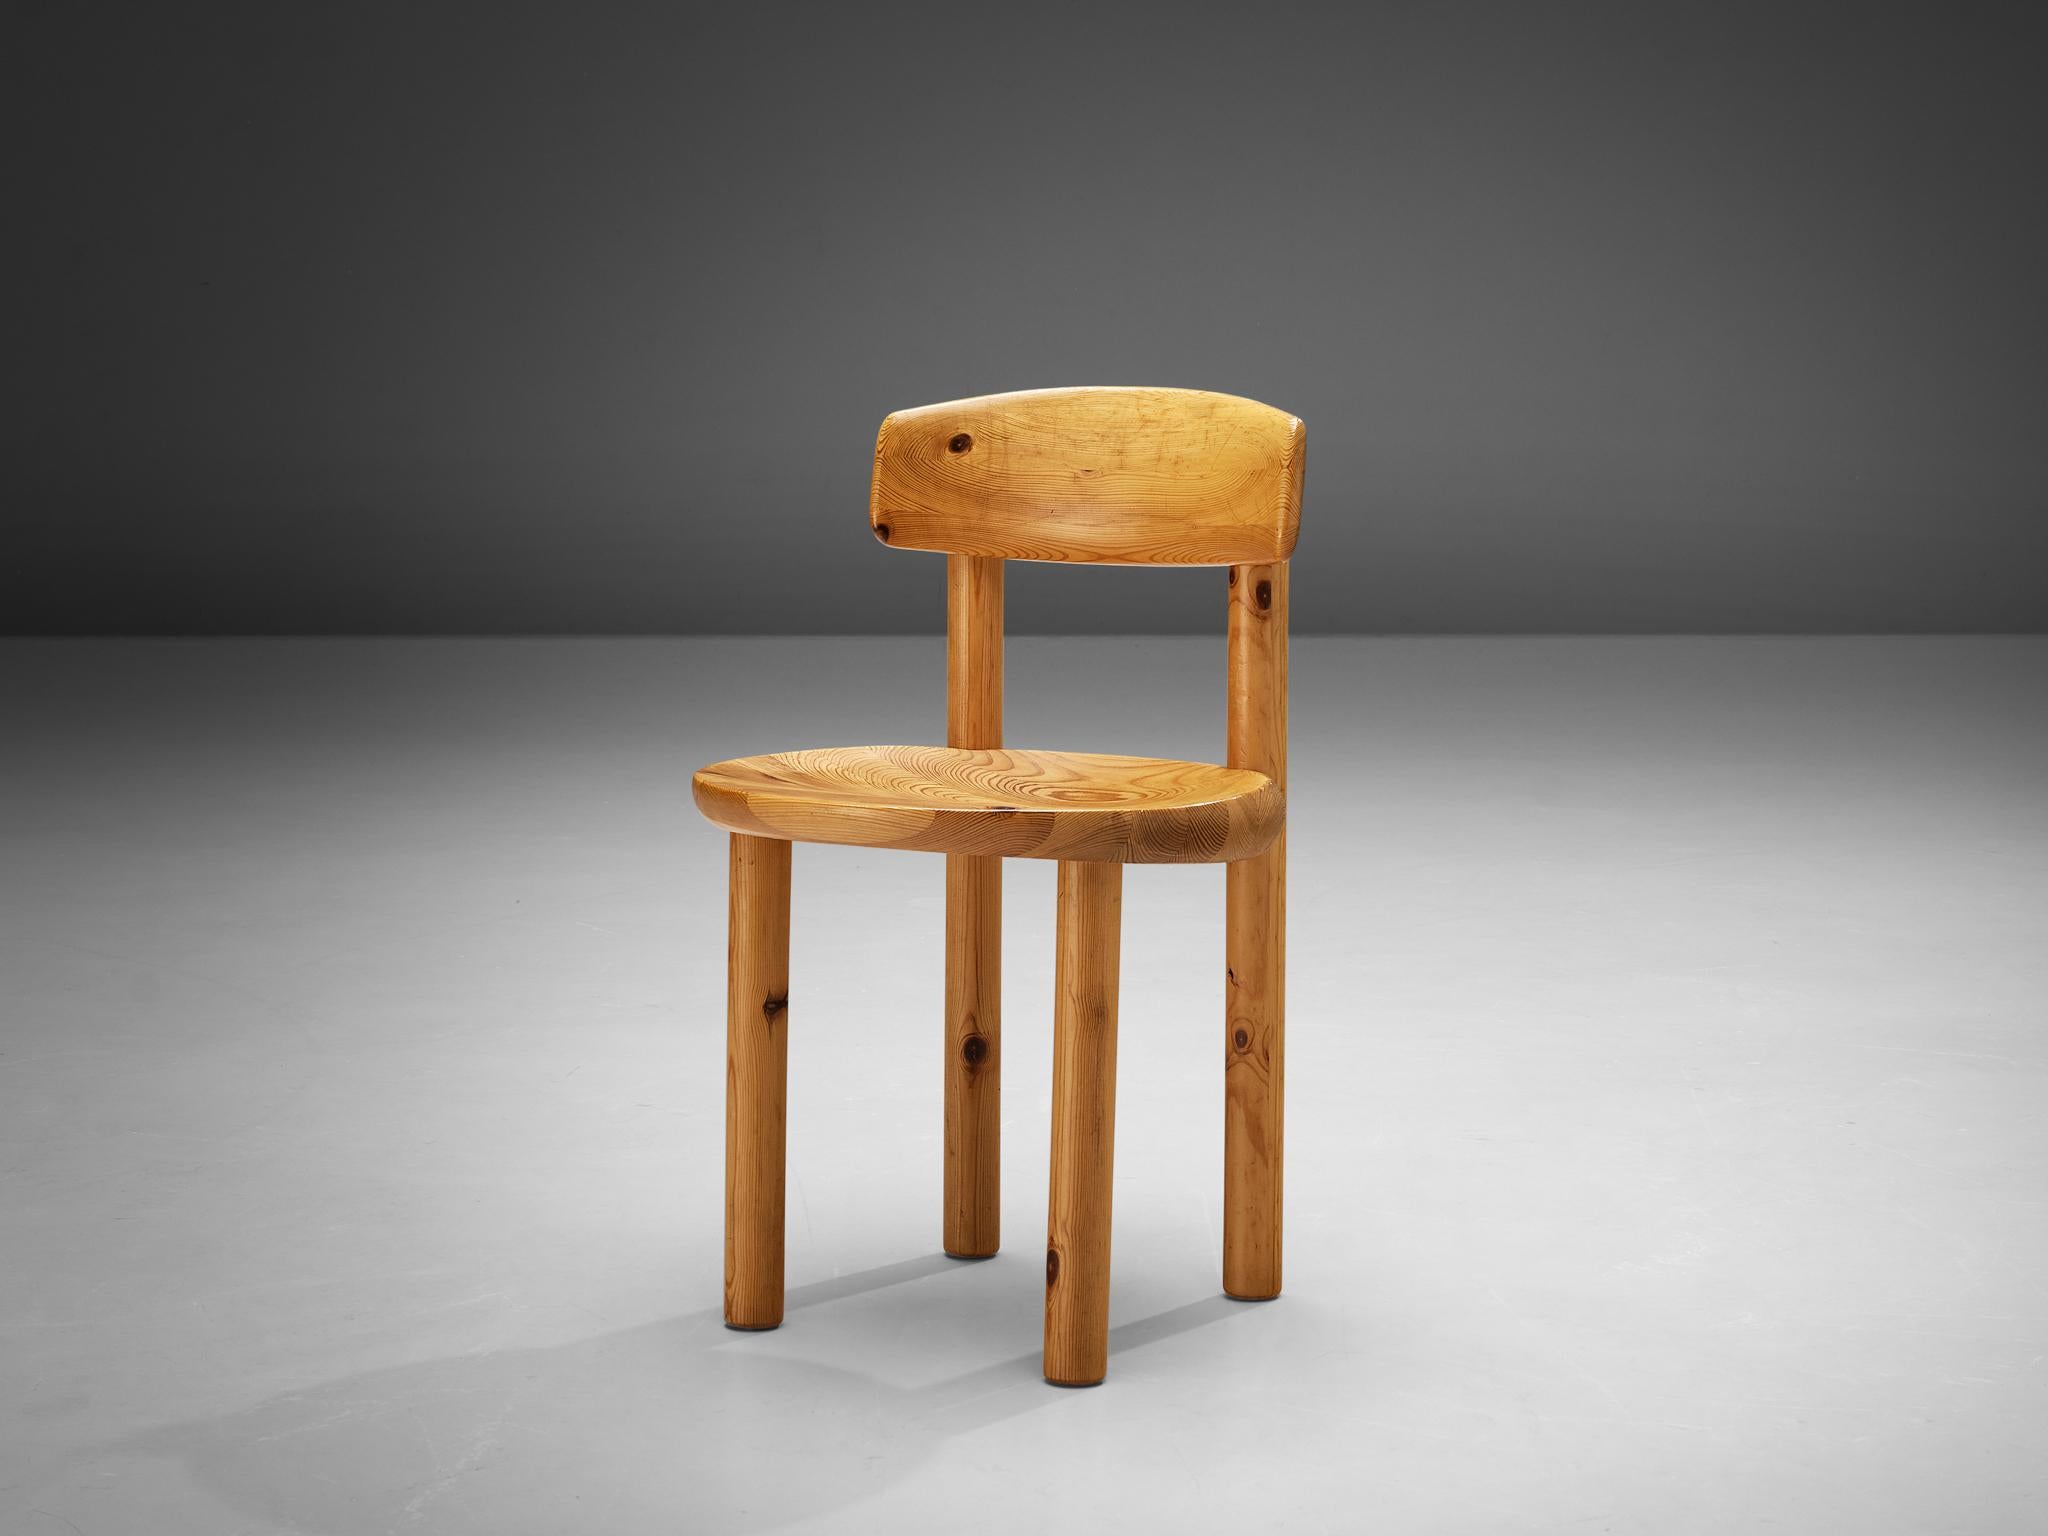 Rainer Daumiller for Hirtshals Savvaerk, dining chair, pine, Denmark, 1970s

Beautiful, organic and natural dining chair in solid pine designed by Rainer Daumiller. A simplistic design with a round seating and attention for the natural expression